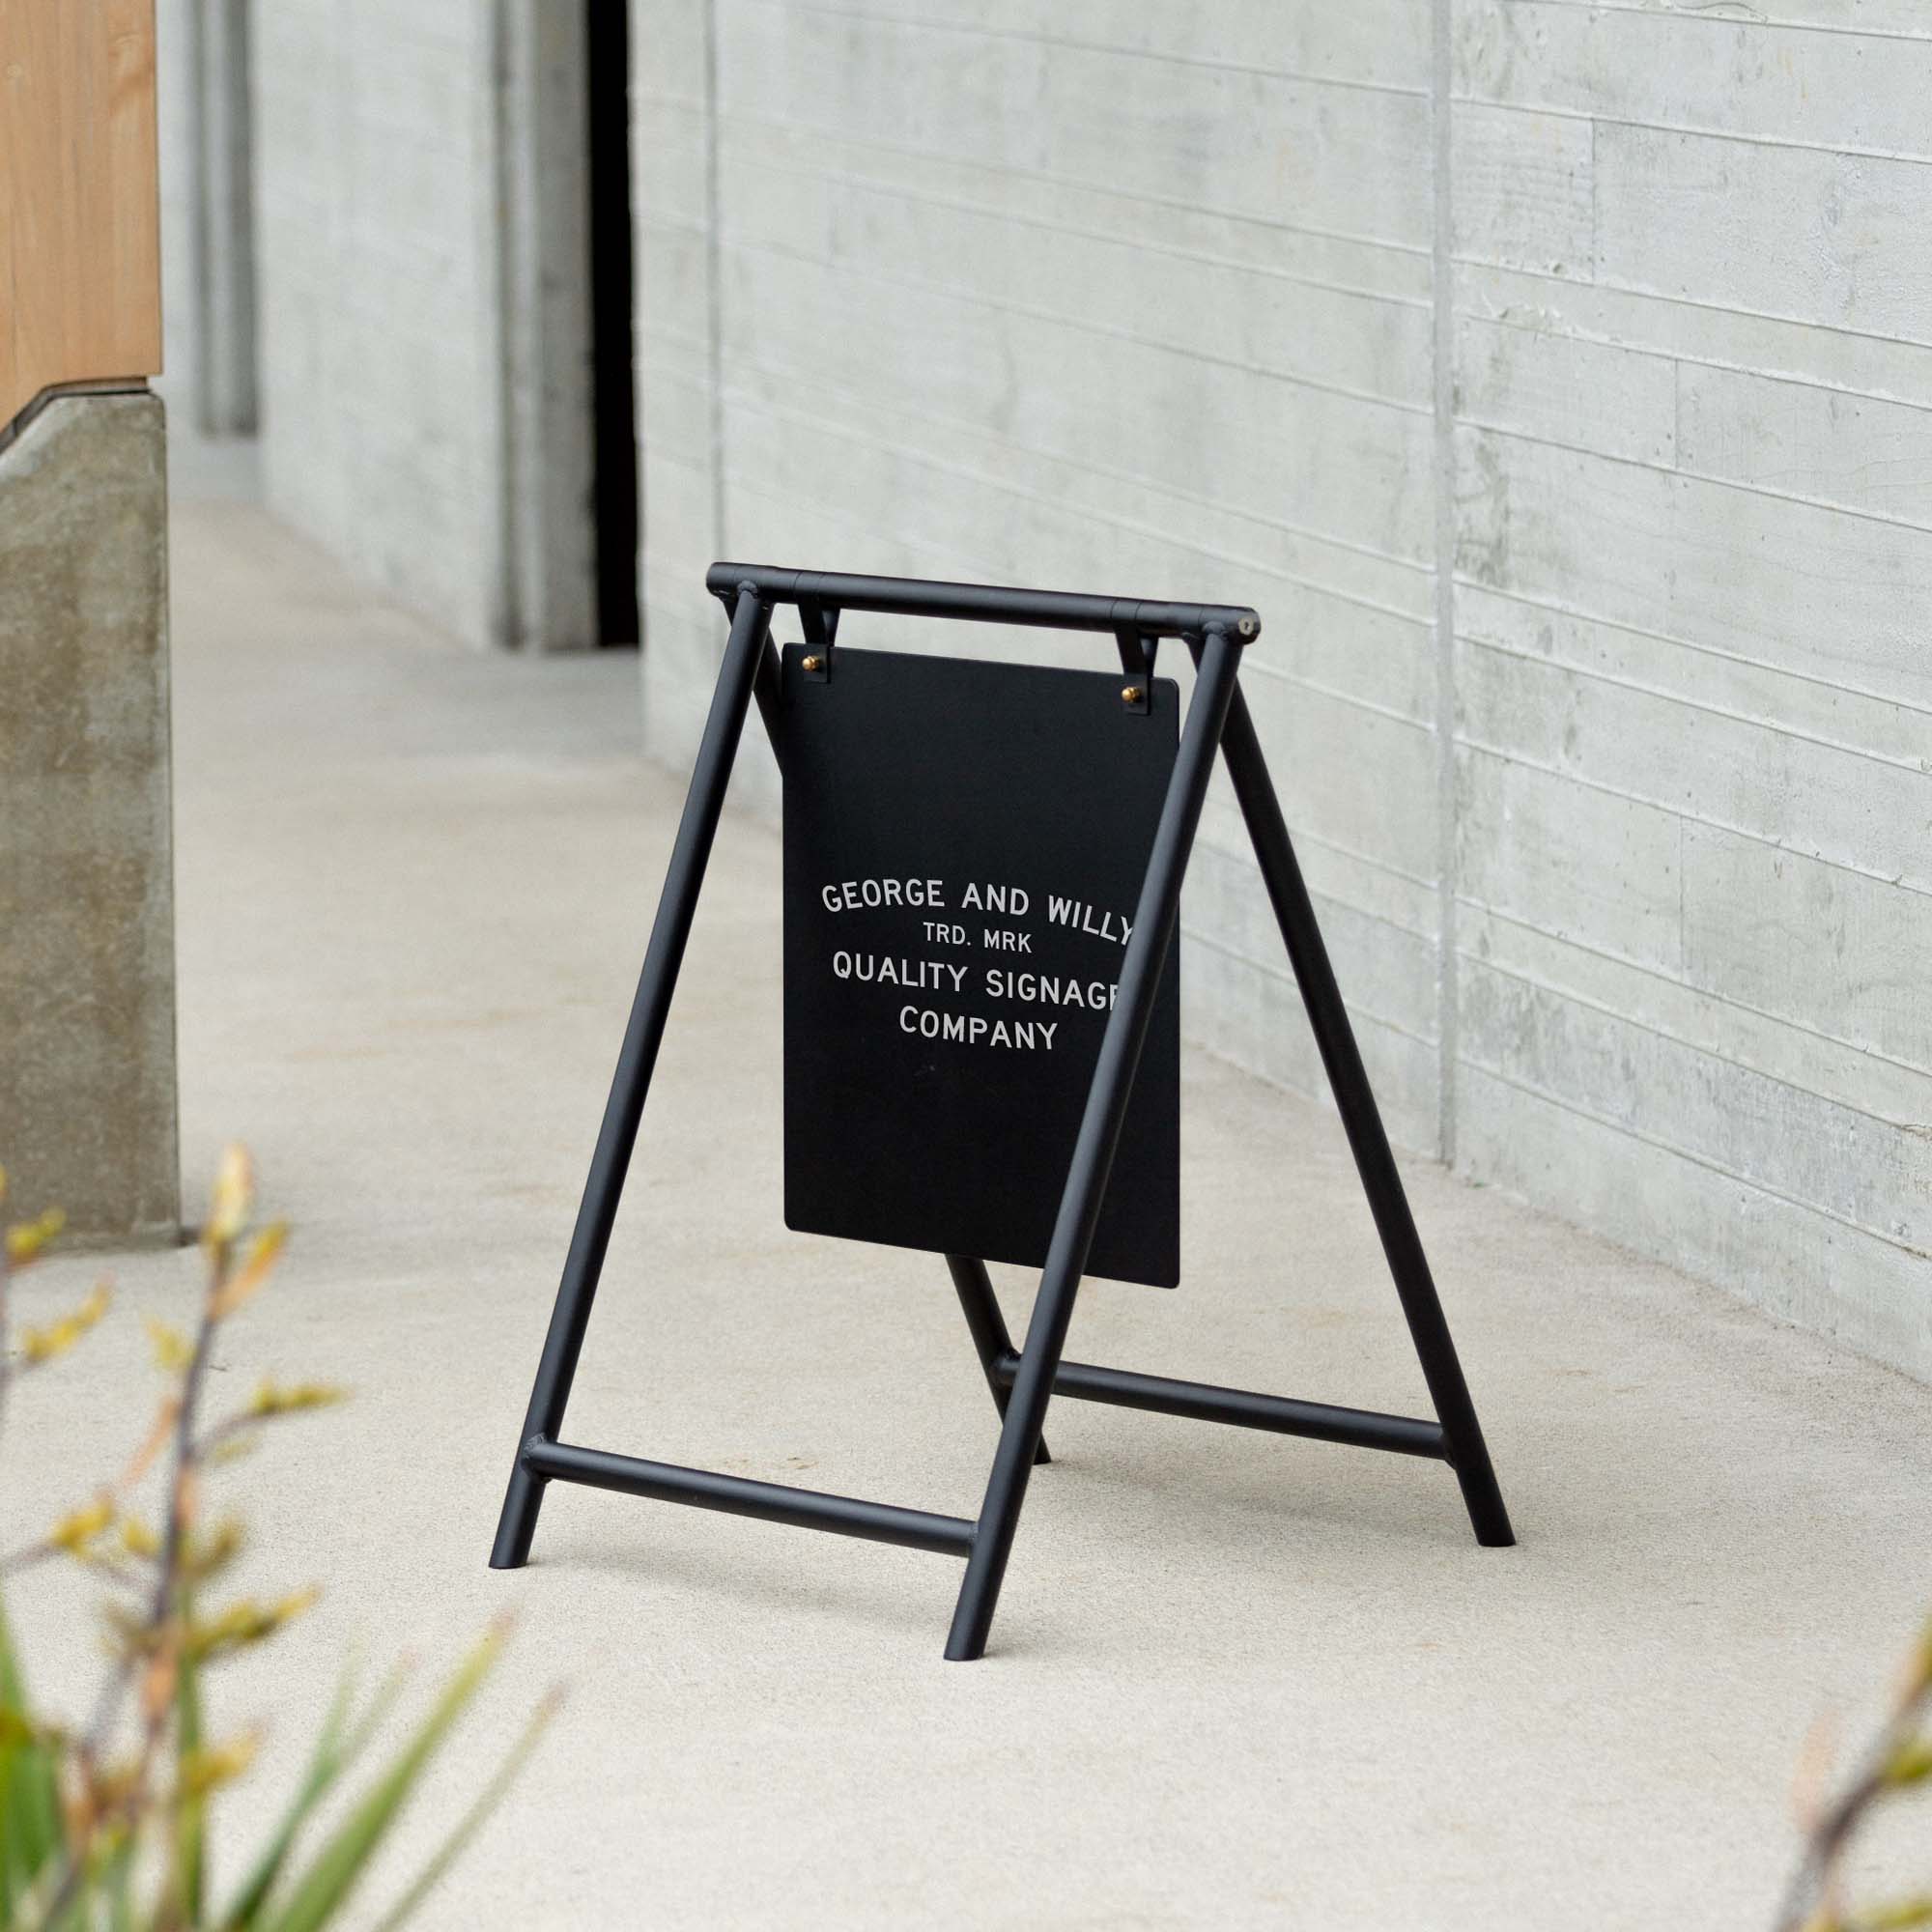 A black metal A-Frame freestanding sign for advertising a business on the street or sidewalk